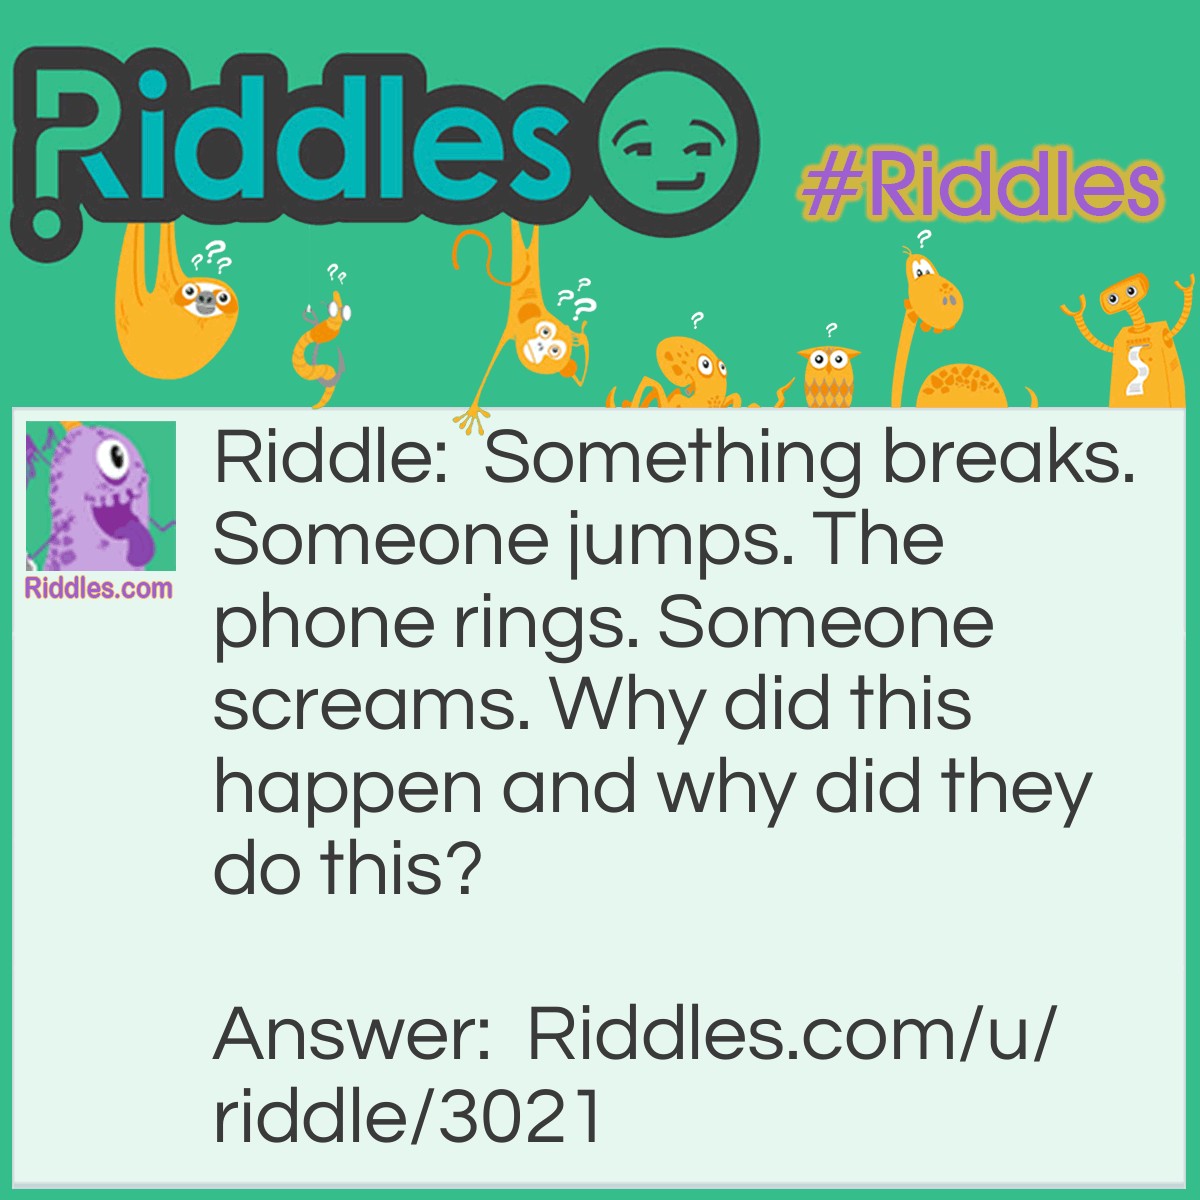 Riddle: Something breaks. Someone jumps. The phone rings. Someone screams. Why did this happen and why did they do this? Answer: The window breaks. Someone jumps to commit suicide because they thought everyone had died. Then the phone rings and someone screams because they realize they're not the only person left.